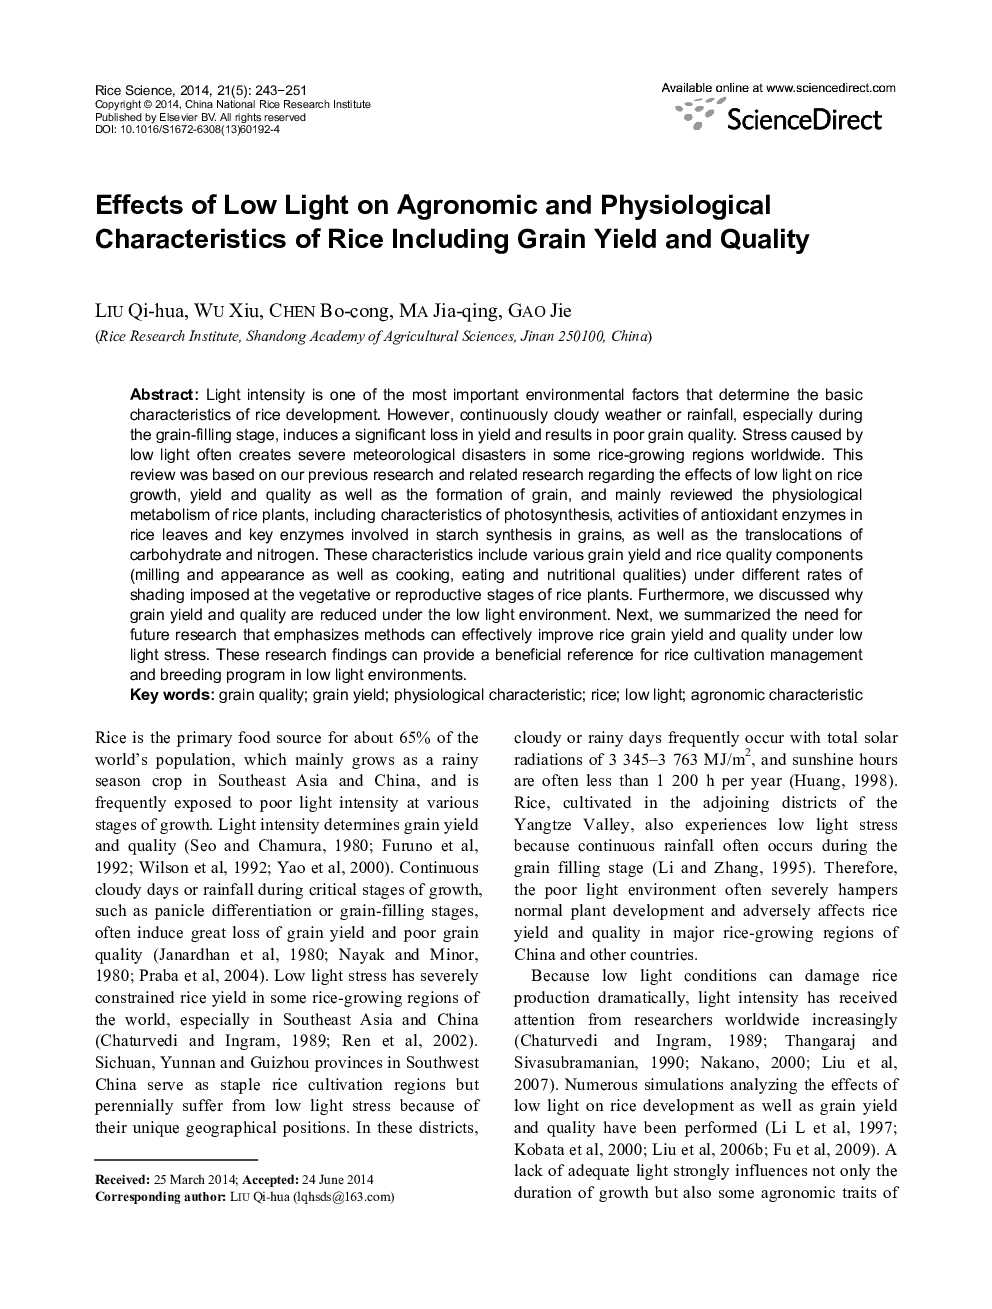 Effects of Low Light on Agronomic and Physiological Characteristics of Rice Including Grain Yield and Quality